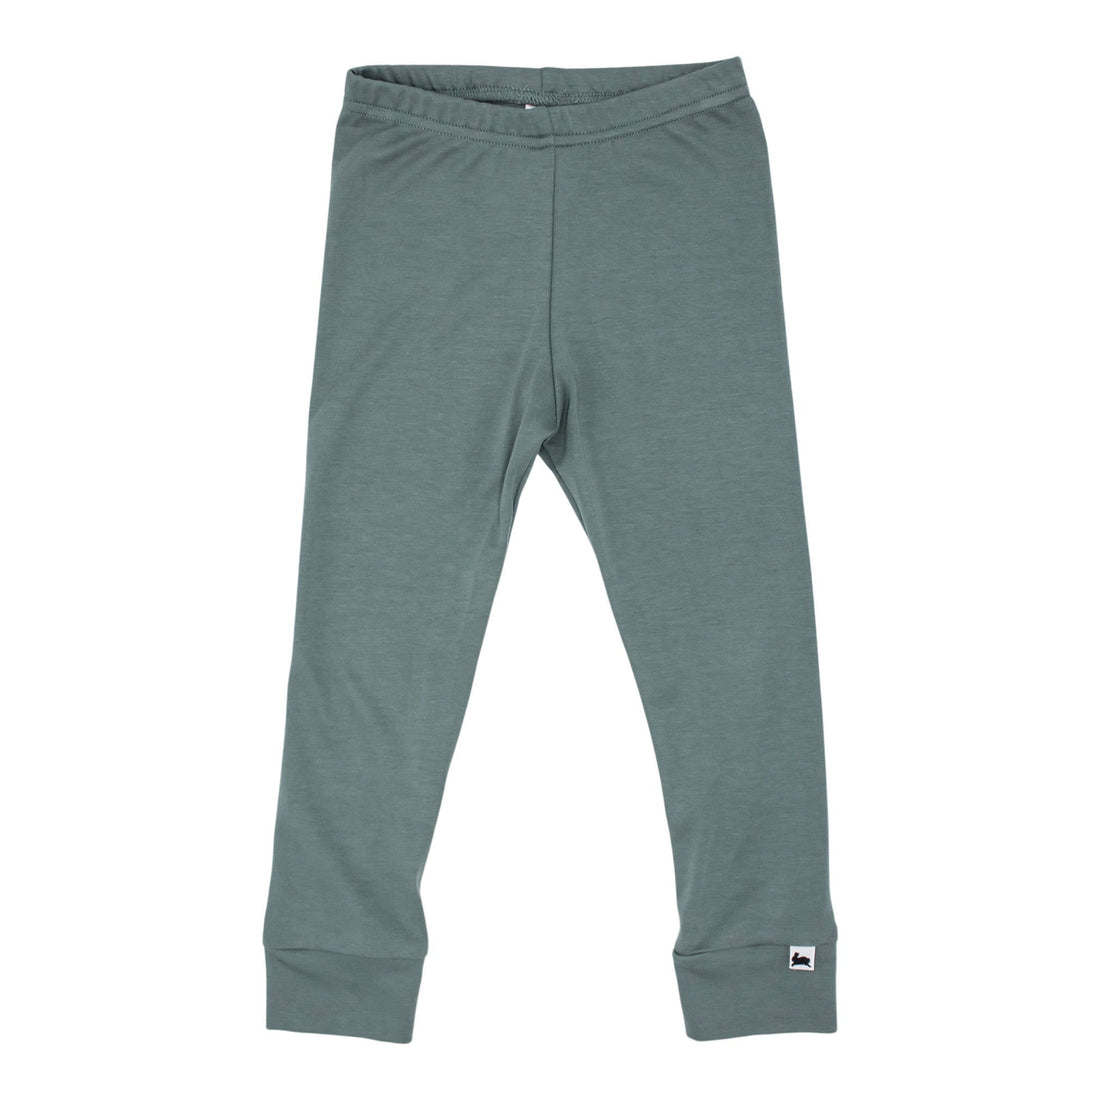 Stay Comfortable and Stylish with Little & Lively's Bamboo Leggings in Eucalyptus